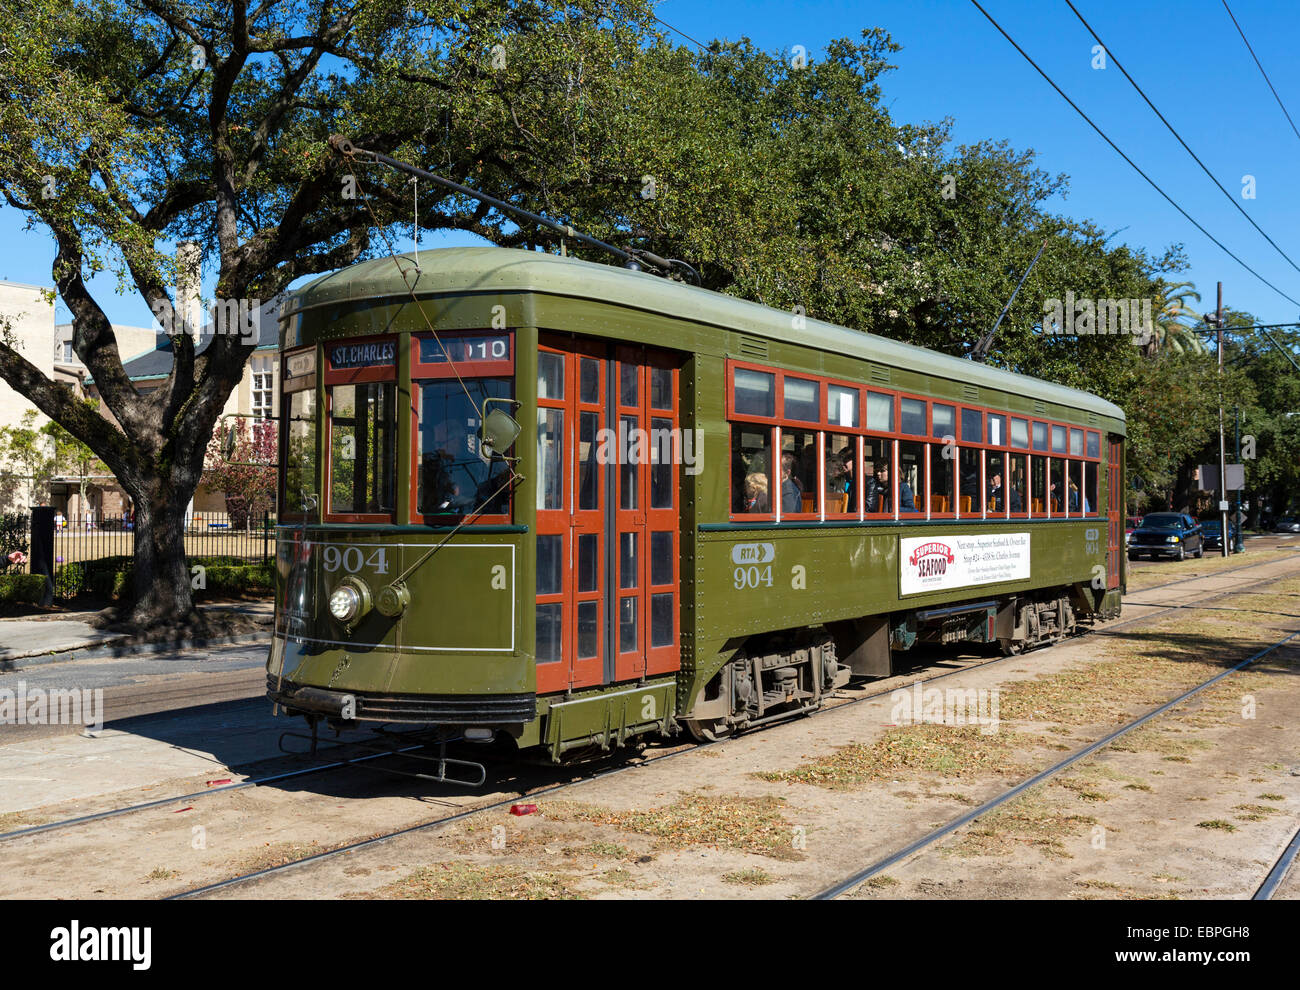 NOLA Trolley Uptown New Orleans Photography Charles Ave Digital Art Photography 940 Street Car St Travel Photo